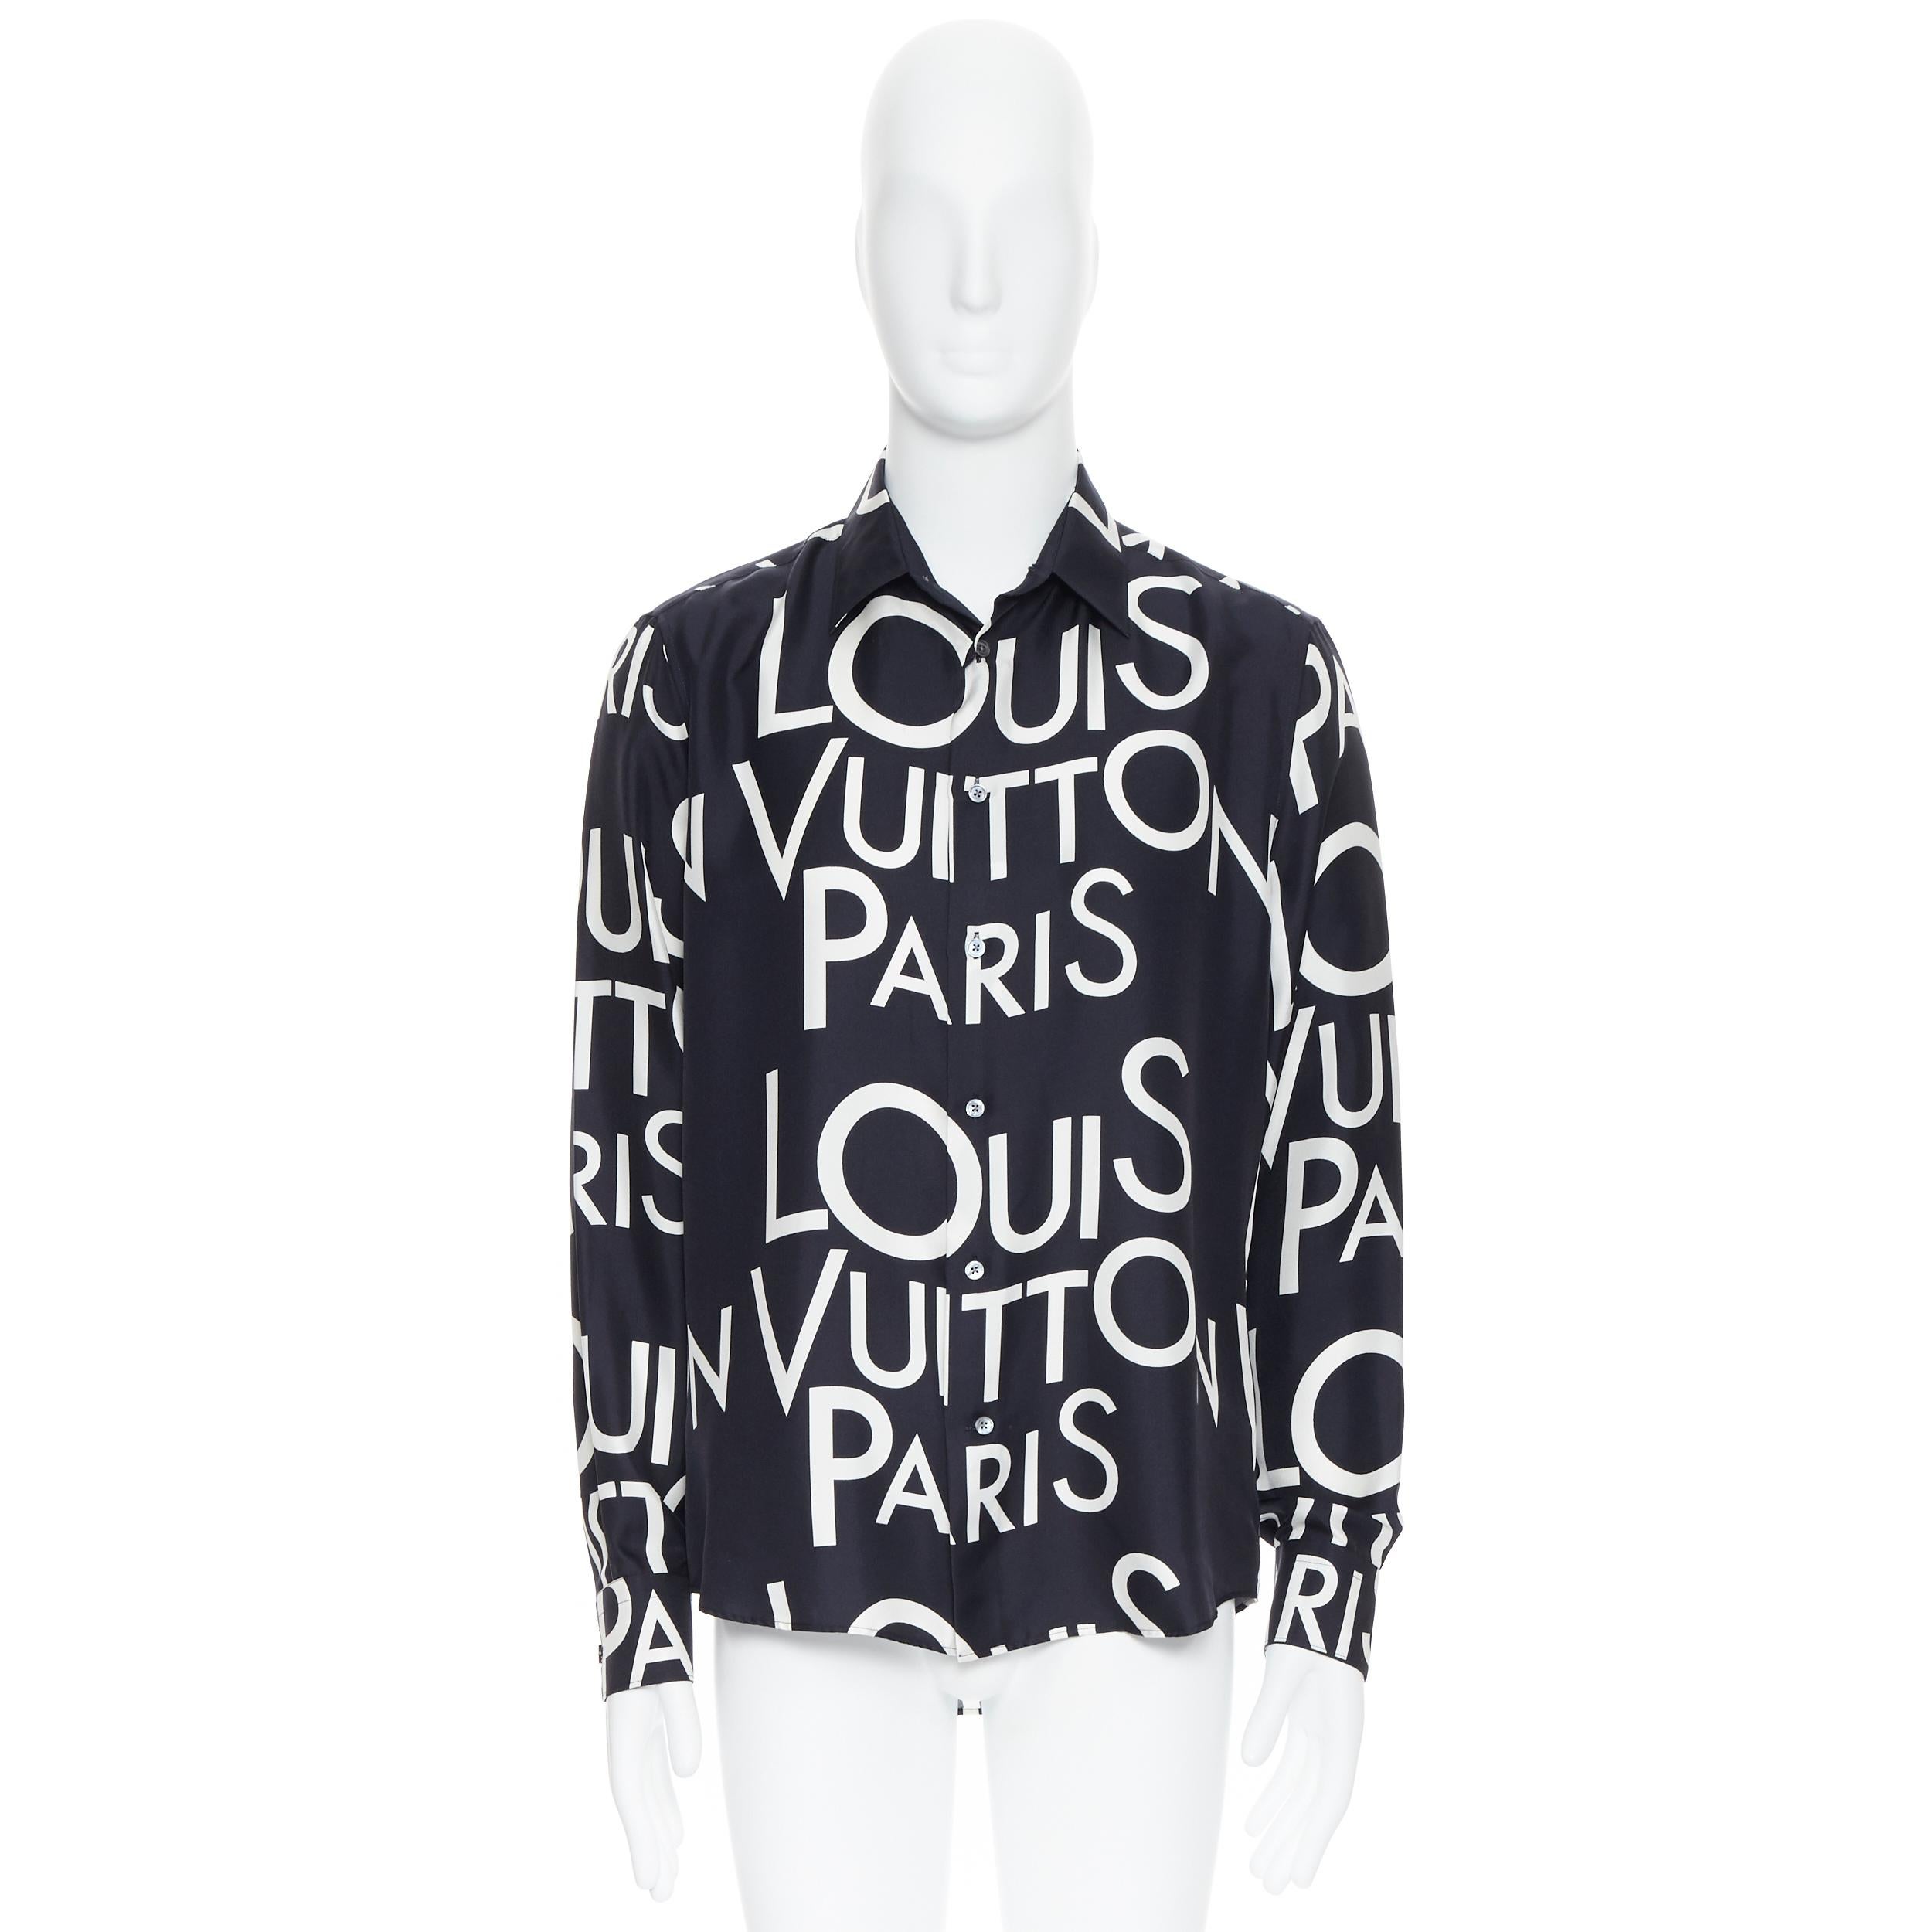 new LOUIS VUITTON 100% silk black white logo typography print regular shirt L
Brand: Louis Vuitton
Model Name / Style: Silk Shirt
Material: Silk
Color: Black
Pattern: Abstract
Closure: Button
Extra Detail: Button front. Relaxed fit.
Made in: